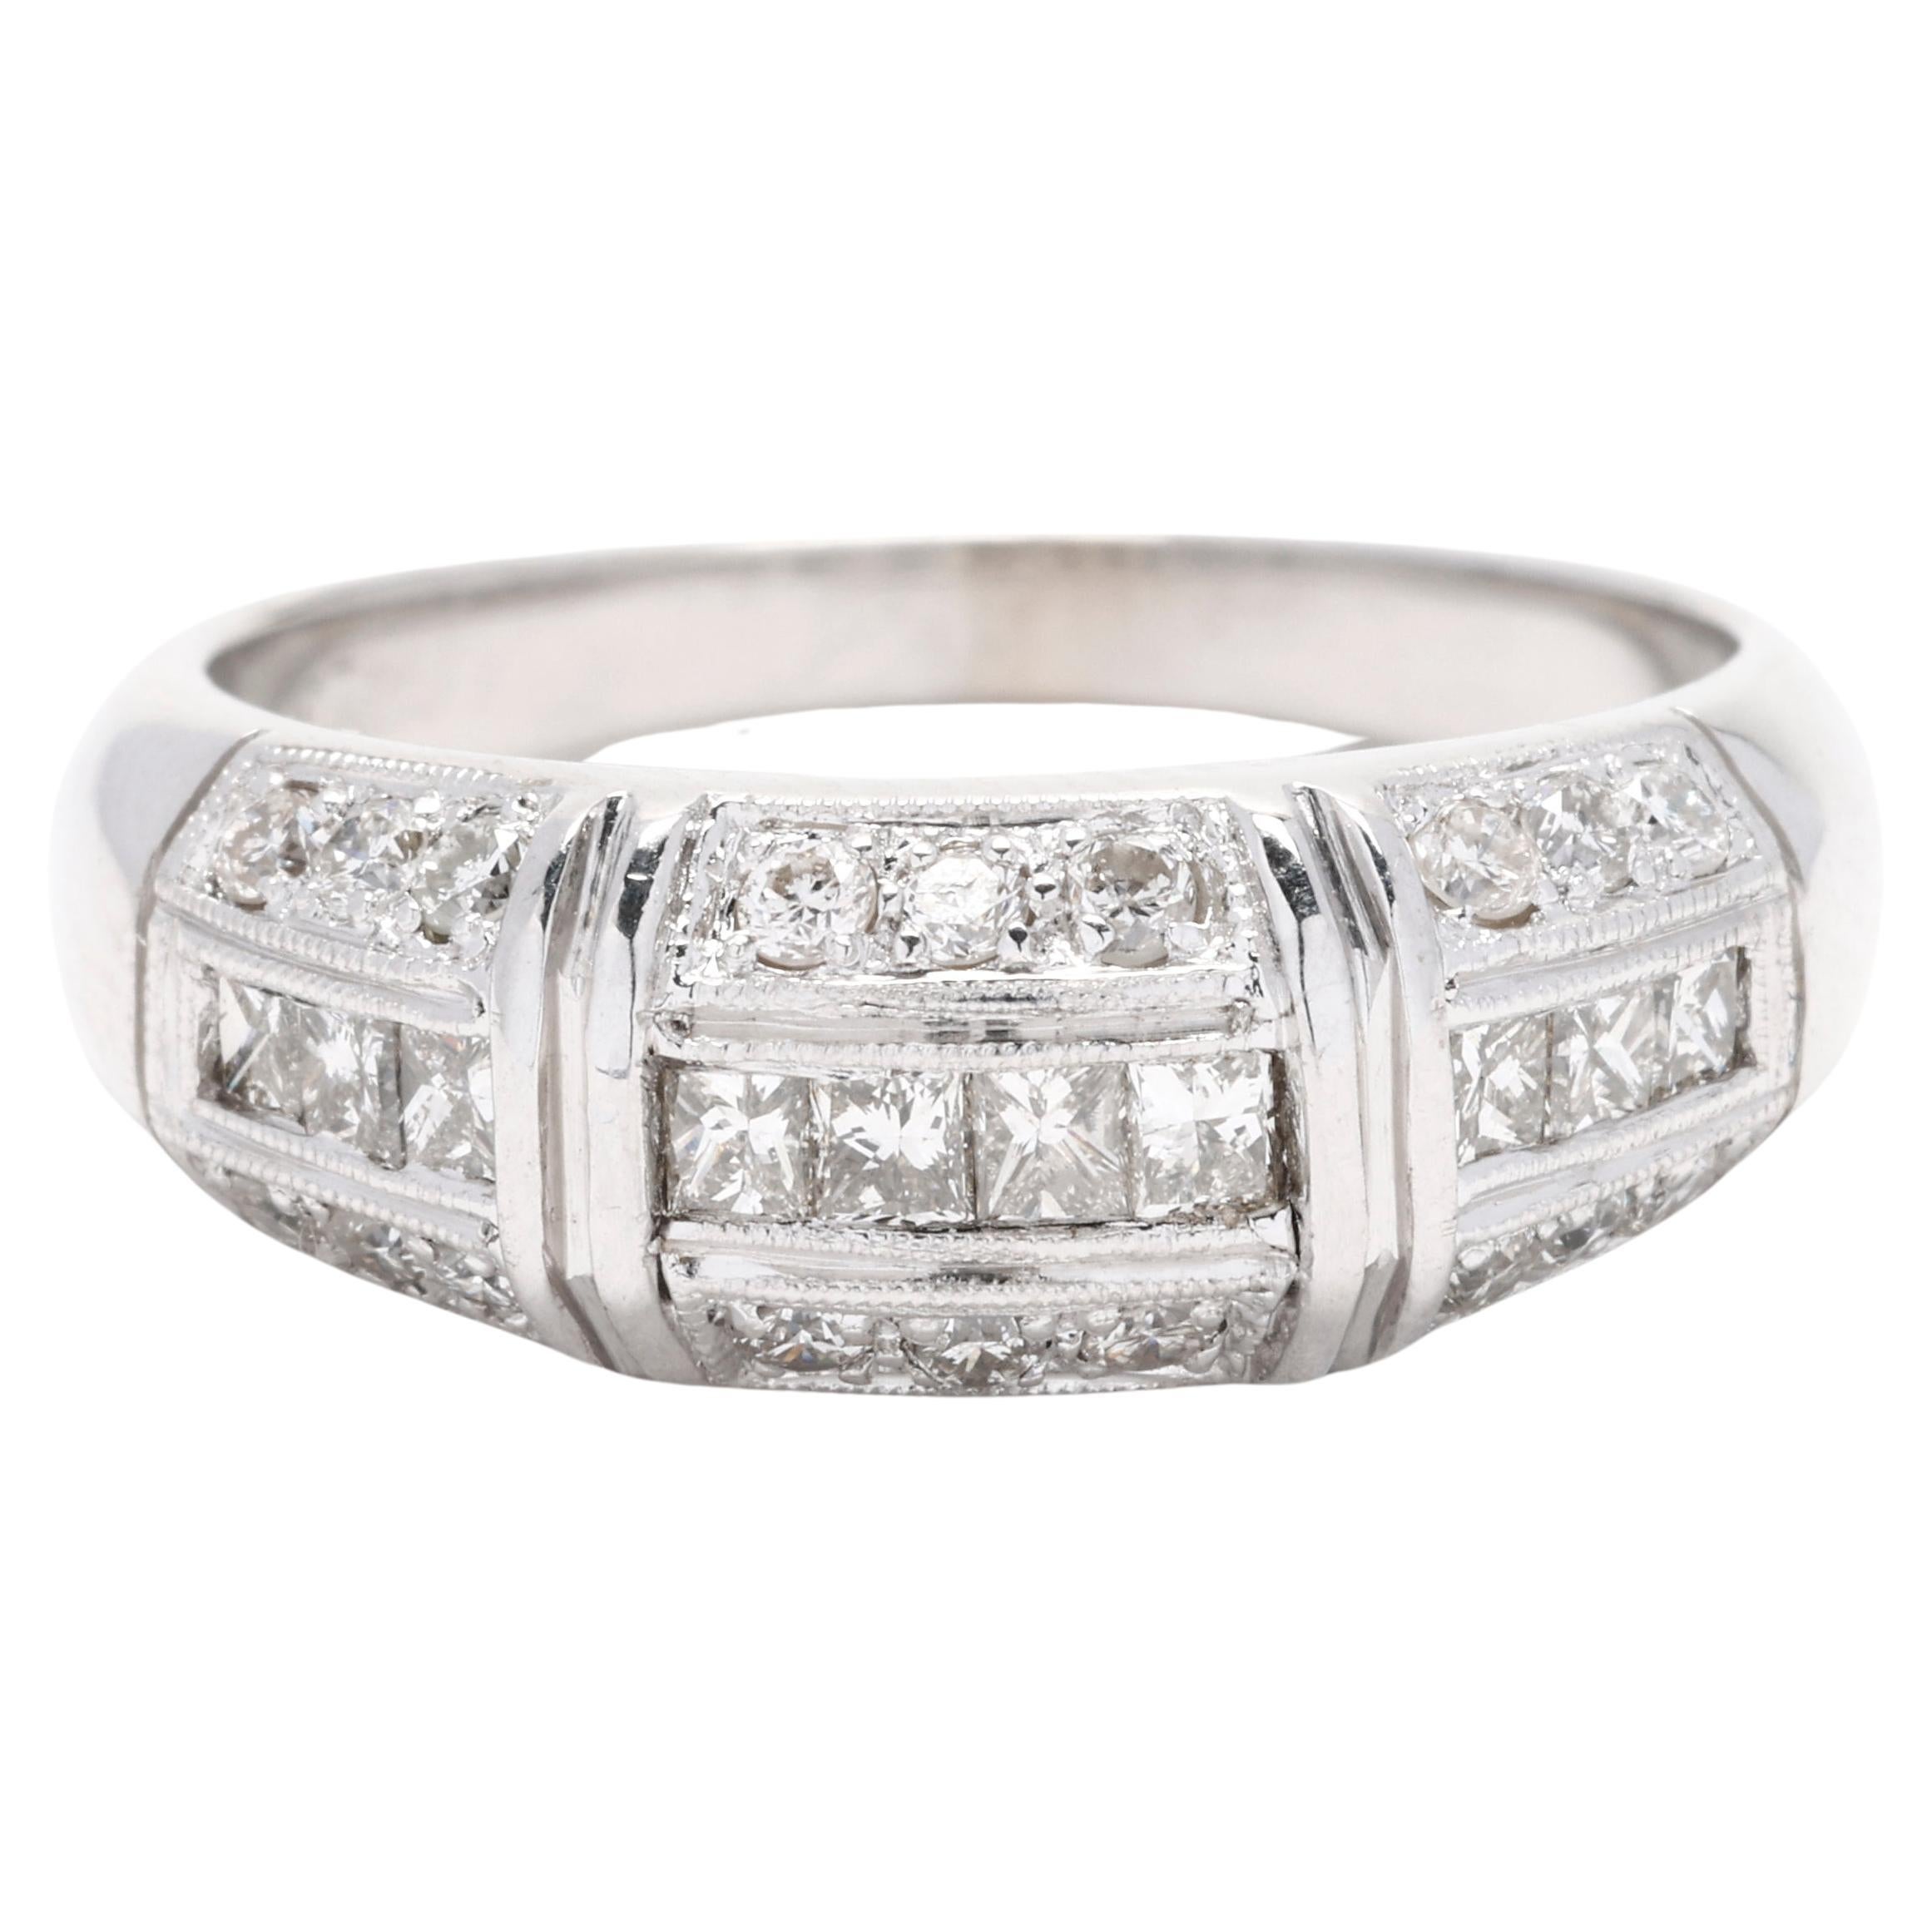 0.75ctw Diamond Thick Band Ring, 14k White Gold, Ring Size 7.75, Stackable